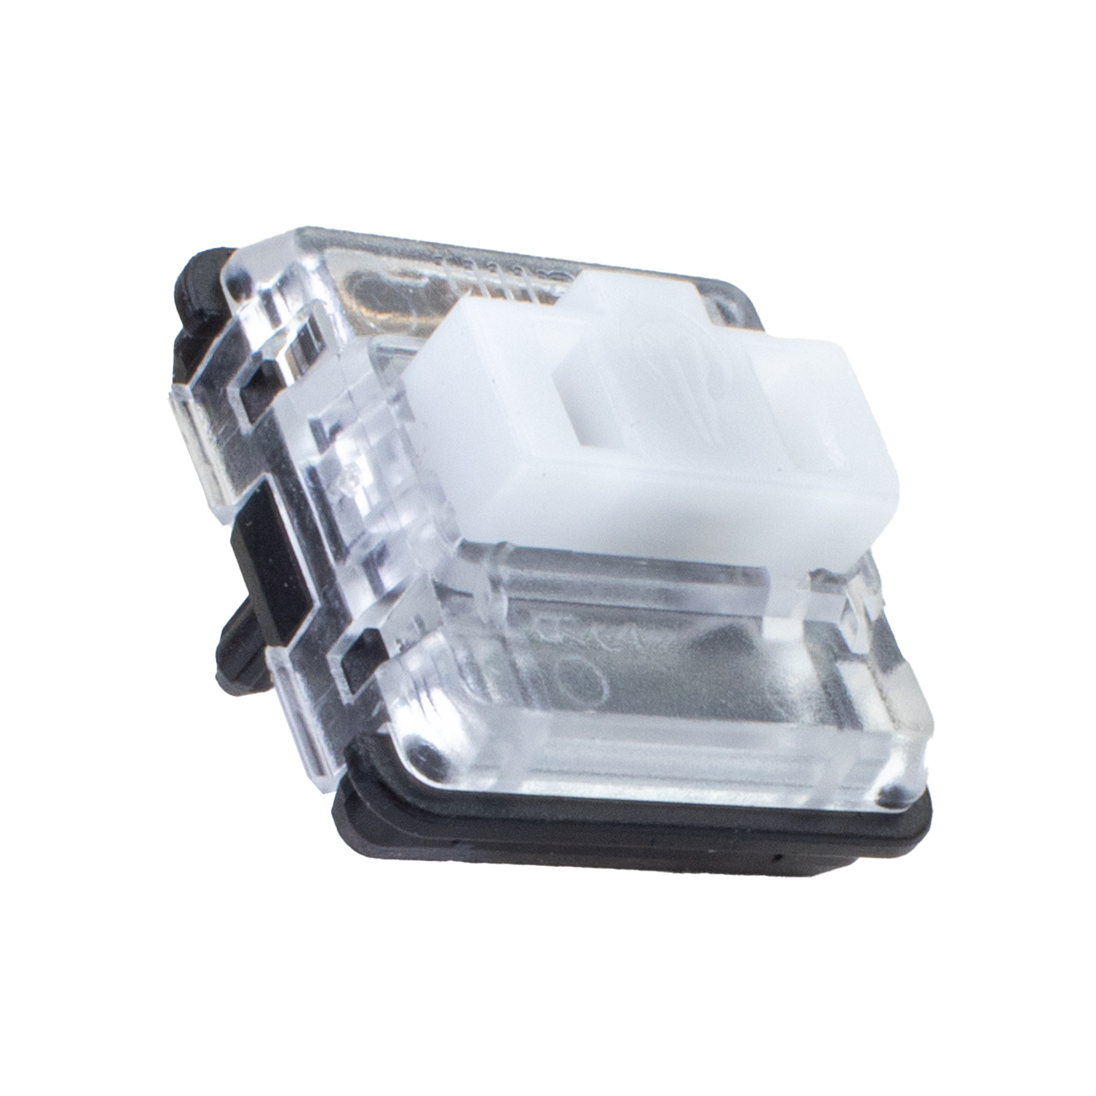 Kailh Choc Low Profile White Switch